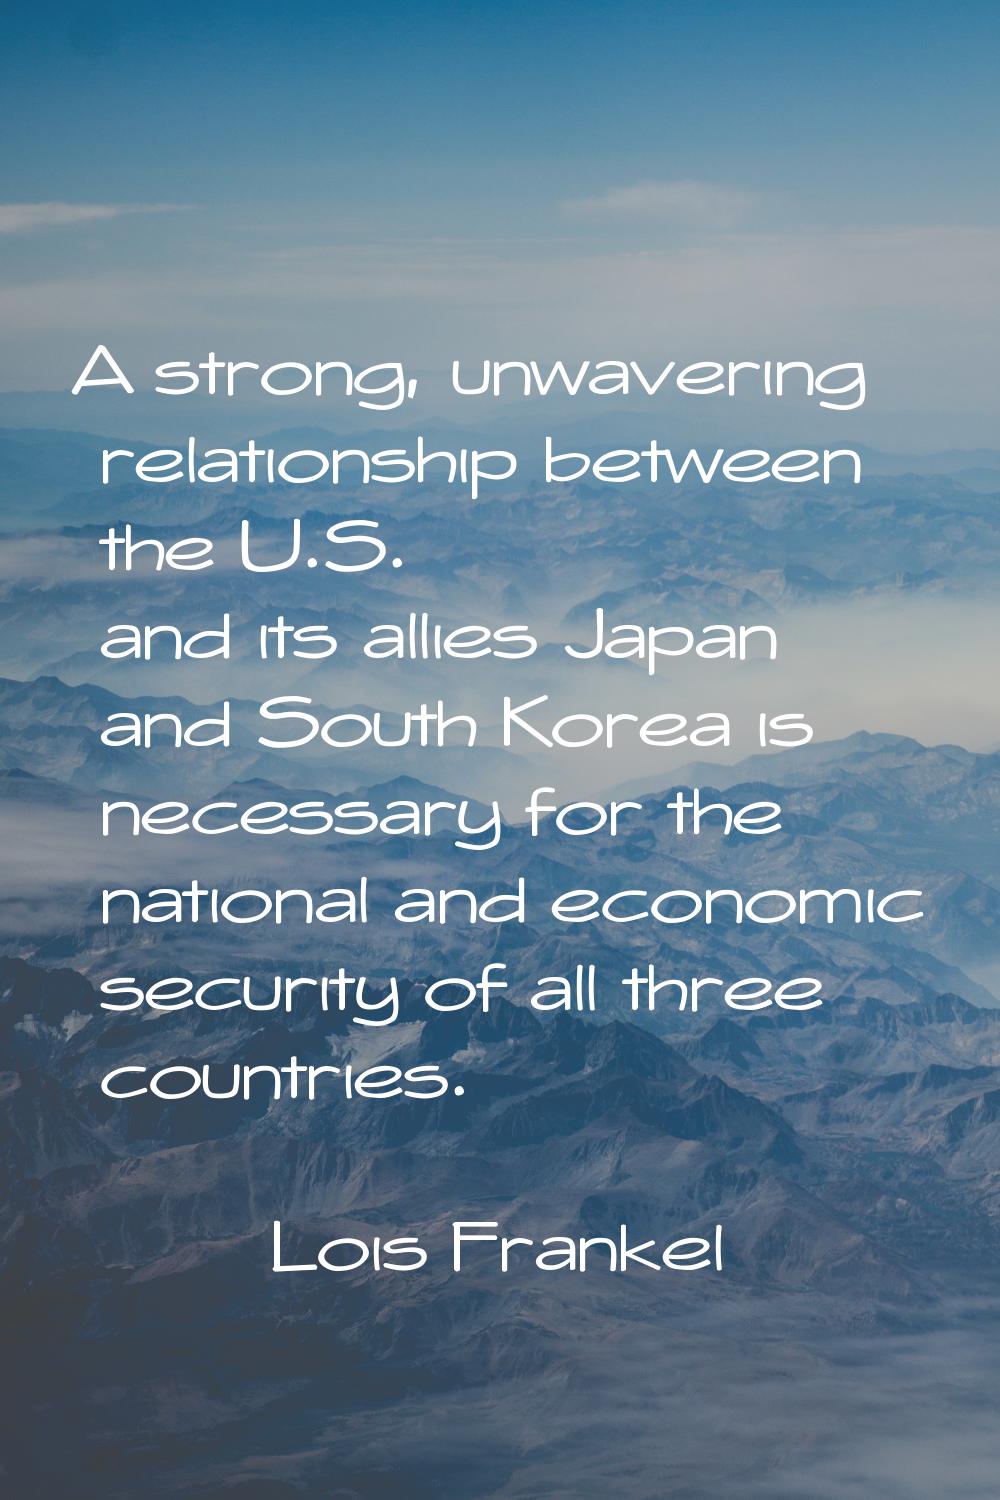 A strong, unwavering relationship between the U.S. and its allies Japan and South Korea is necessar